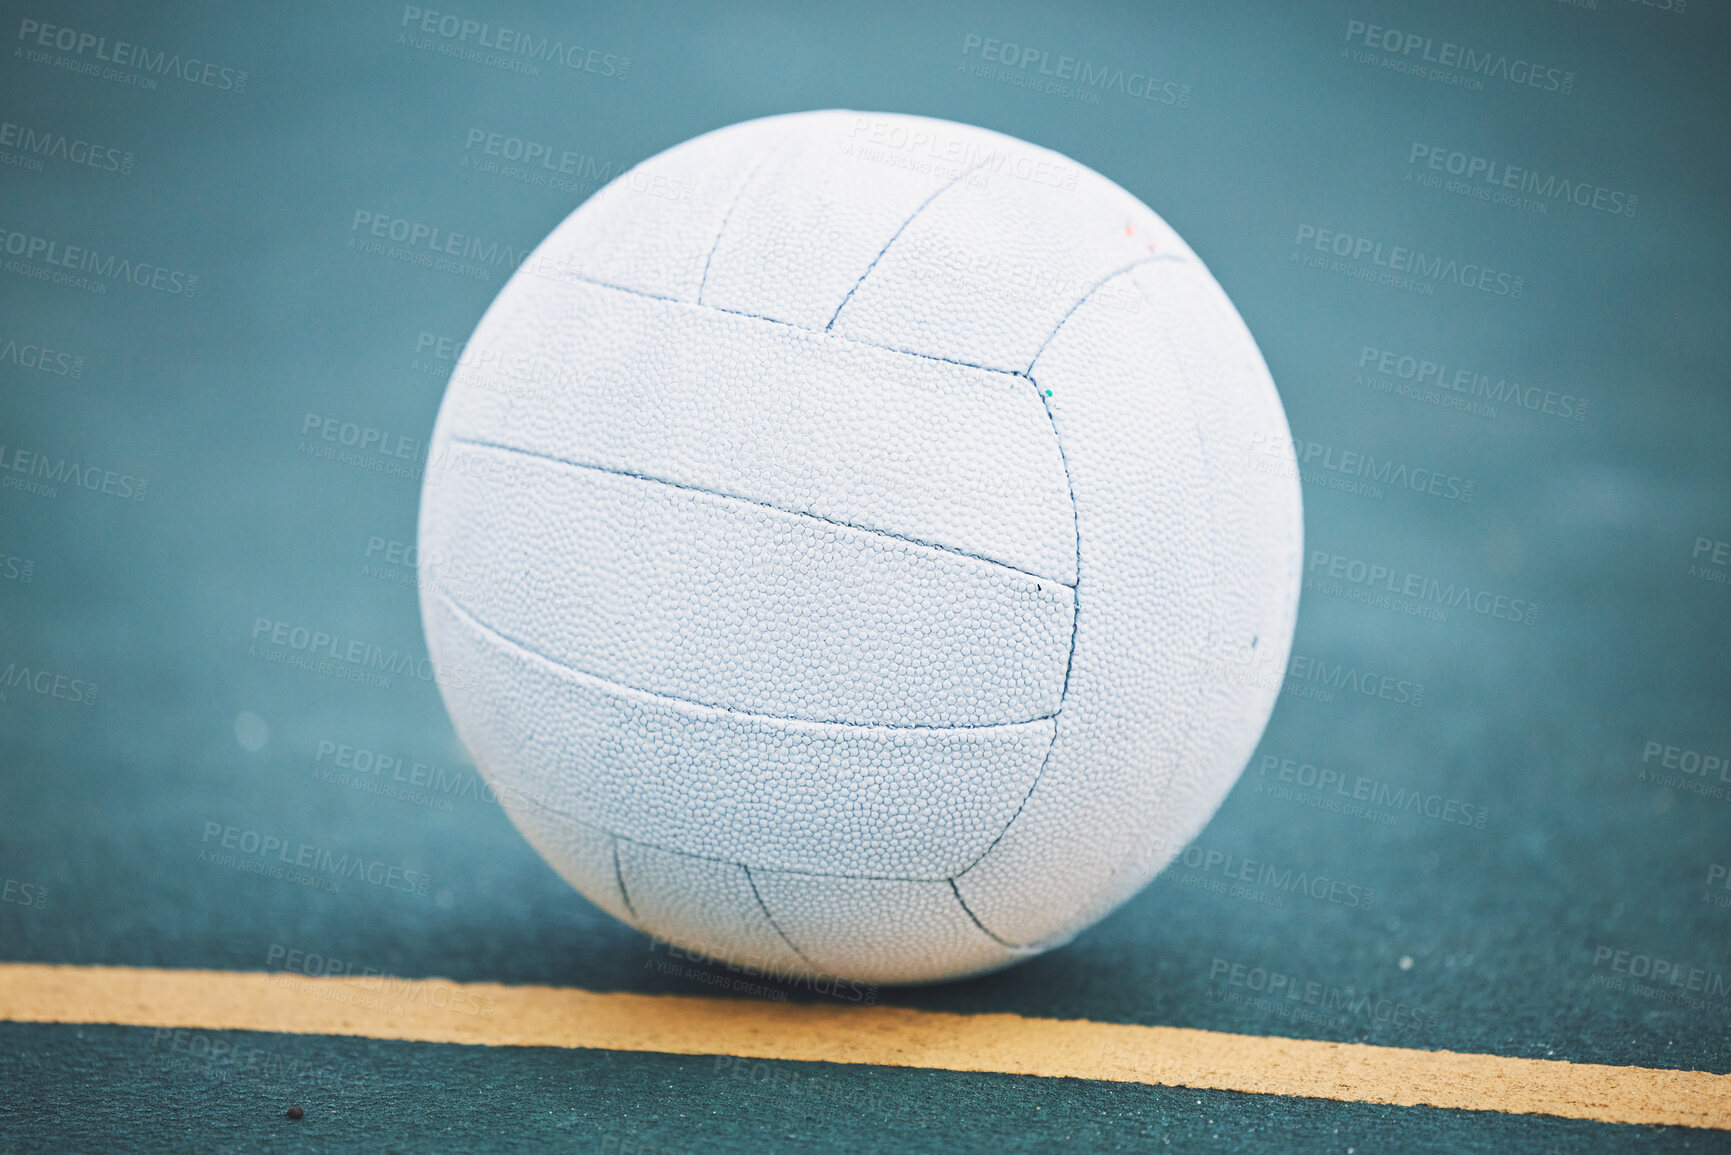 Buy stock photo Netball on the floor on a sport court for a game, training or exercise outdoor on a field. Sports, fitness and white ball on the ground for a match, workout or practice competition by a outside arena